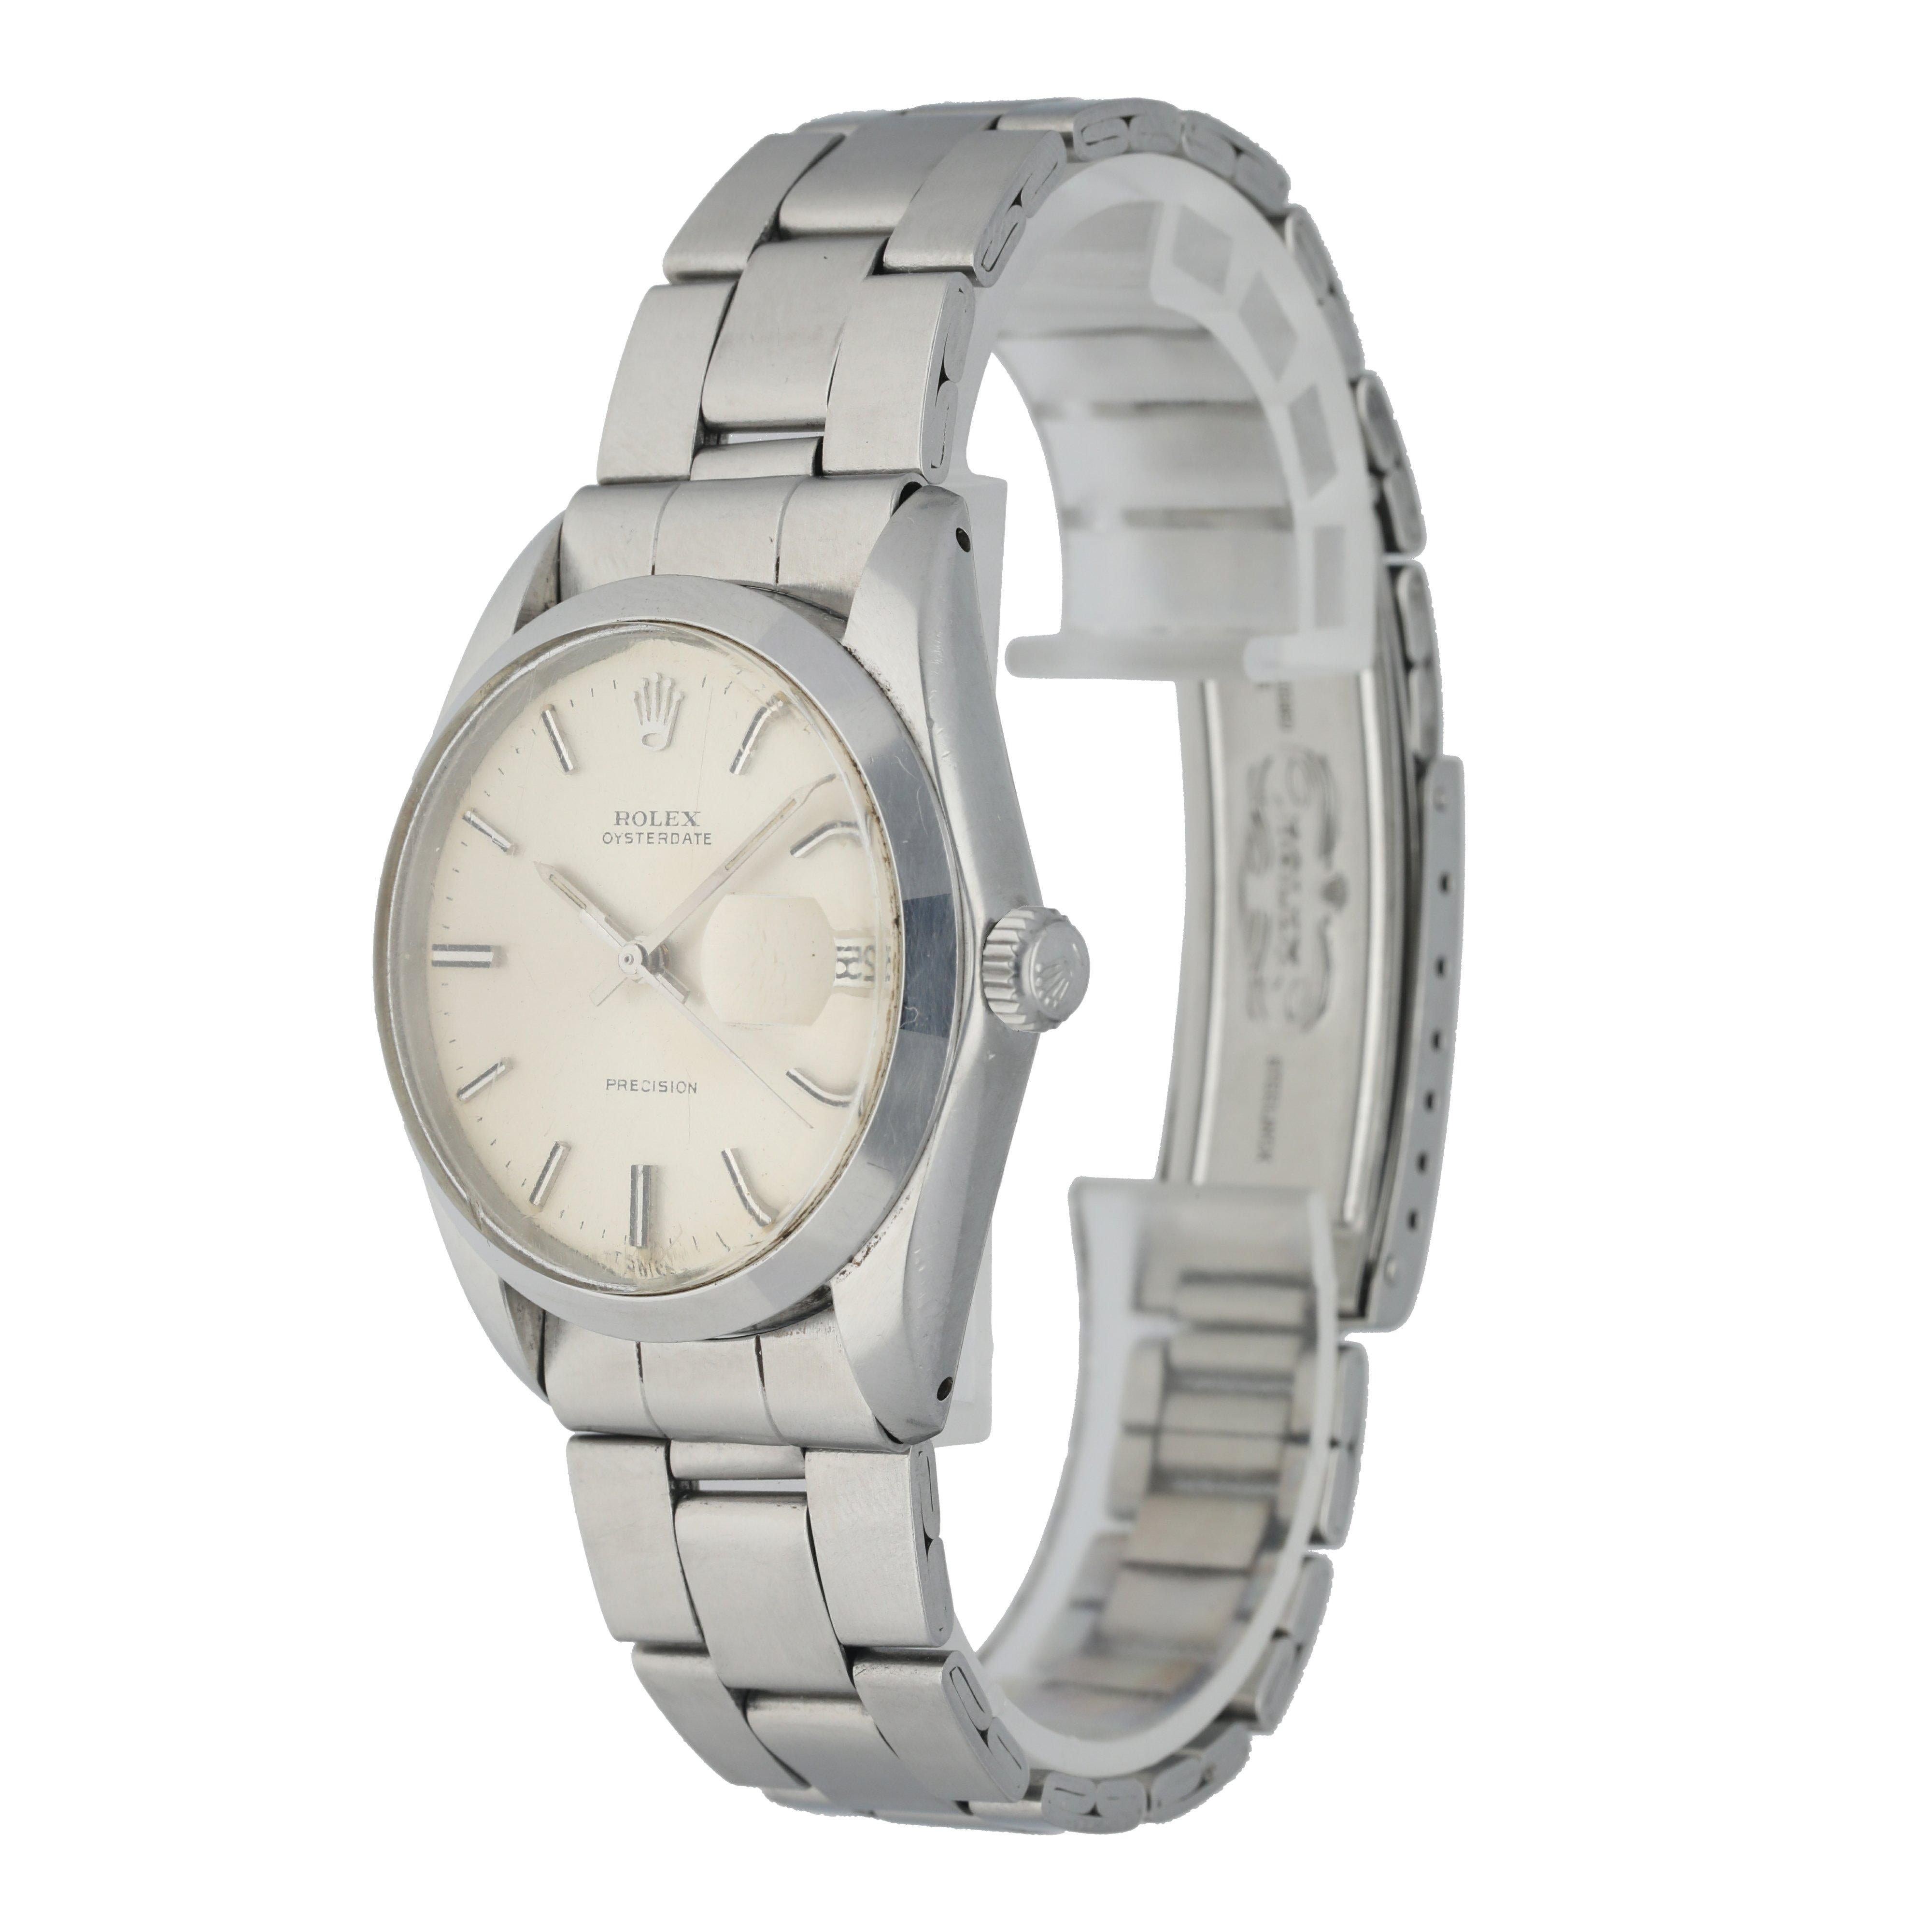 Rolex OysterDate Precision 6694 Vintage Men's Watch. 
34mm stainless steel case with a smooth bezel. 
Silver dial with silver-tone hands and indexes. 
Minute markers on the outer dial. 
Date Display at the 3 o'clock position. 
vintage crimped